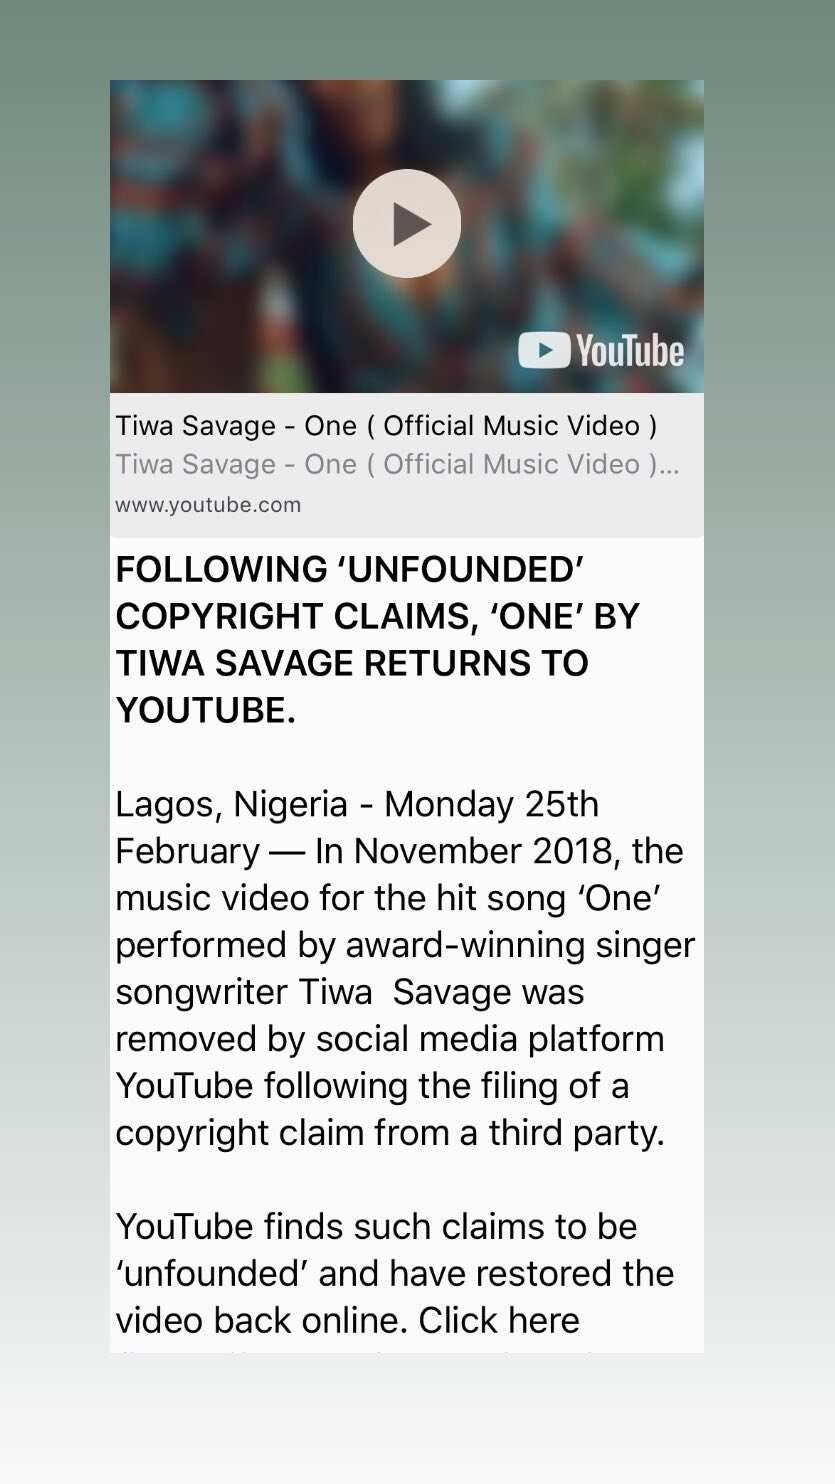 YouTube restores Tiwa Savege's One video following unfounded copyright claims by Danny Young